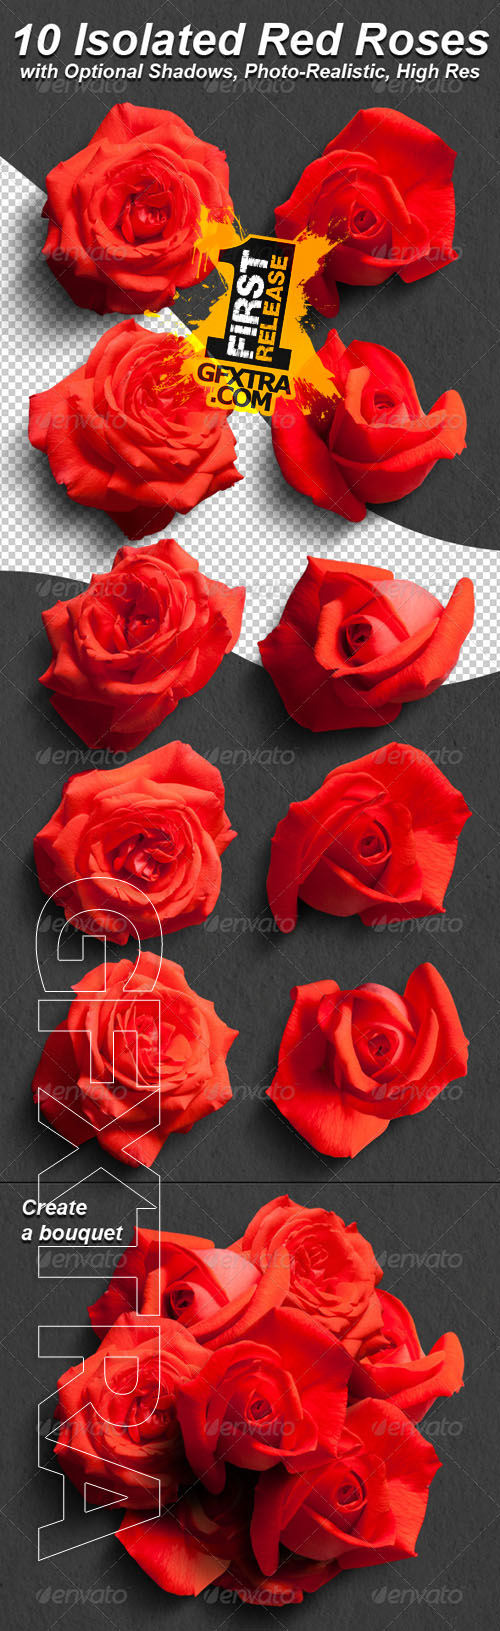 GraphicRiver - 10 Photo-Realistic Isolated Red Roses 